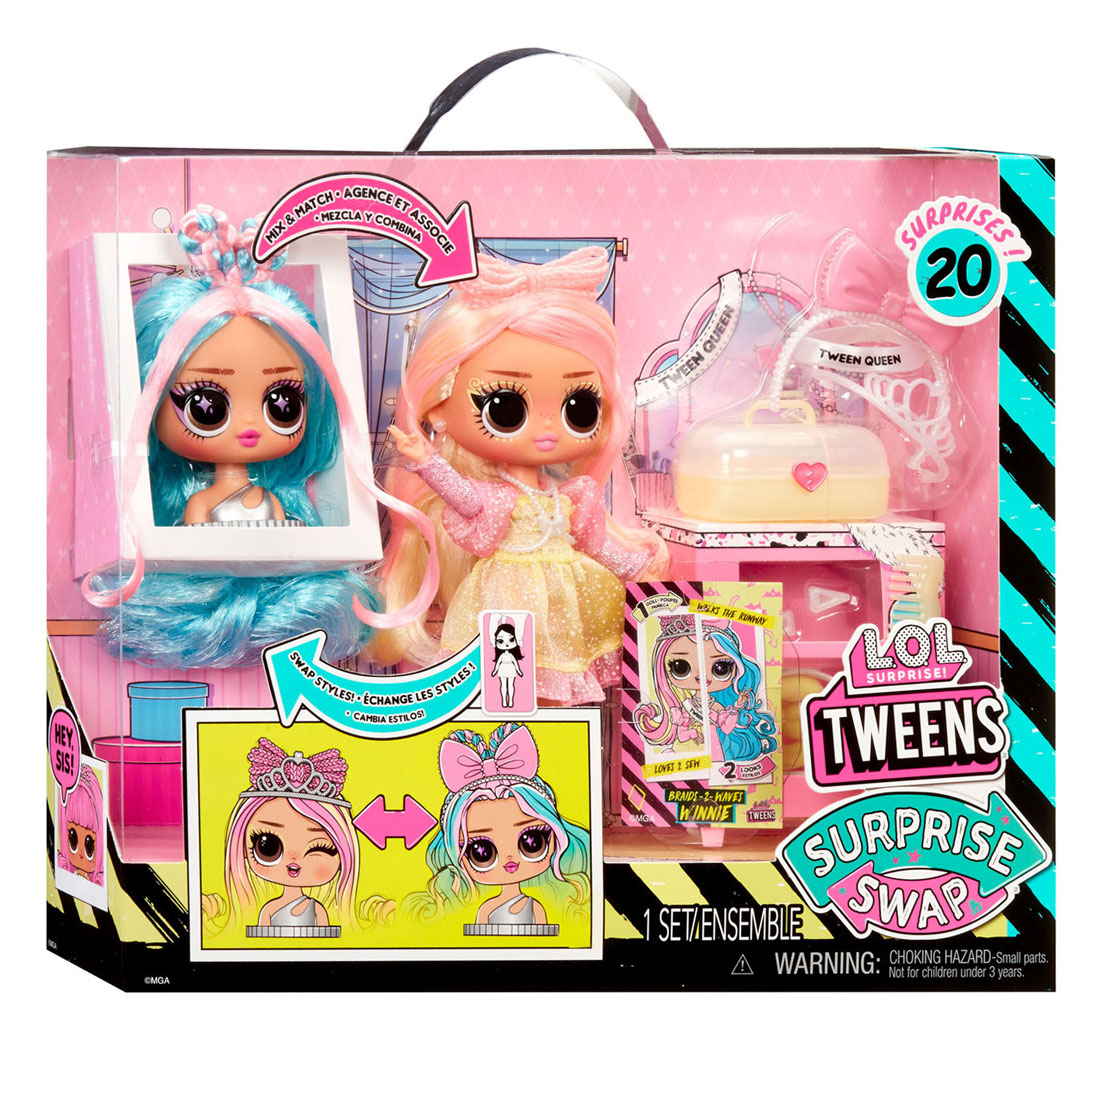 New LOL tweens with interchangeable heads! With little peace sign hands! :  r/Dolls